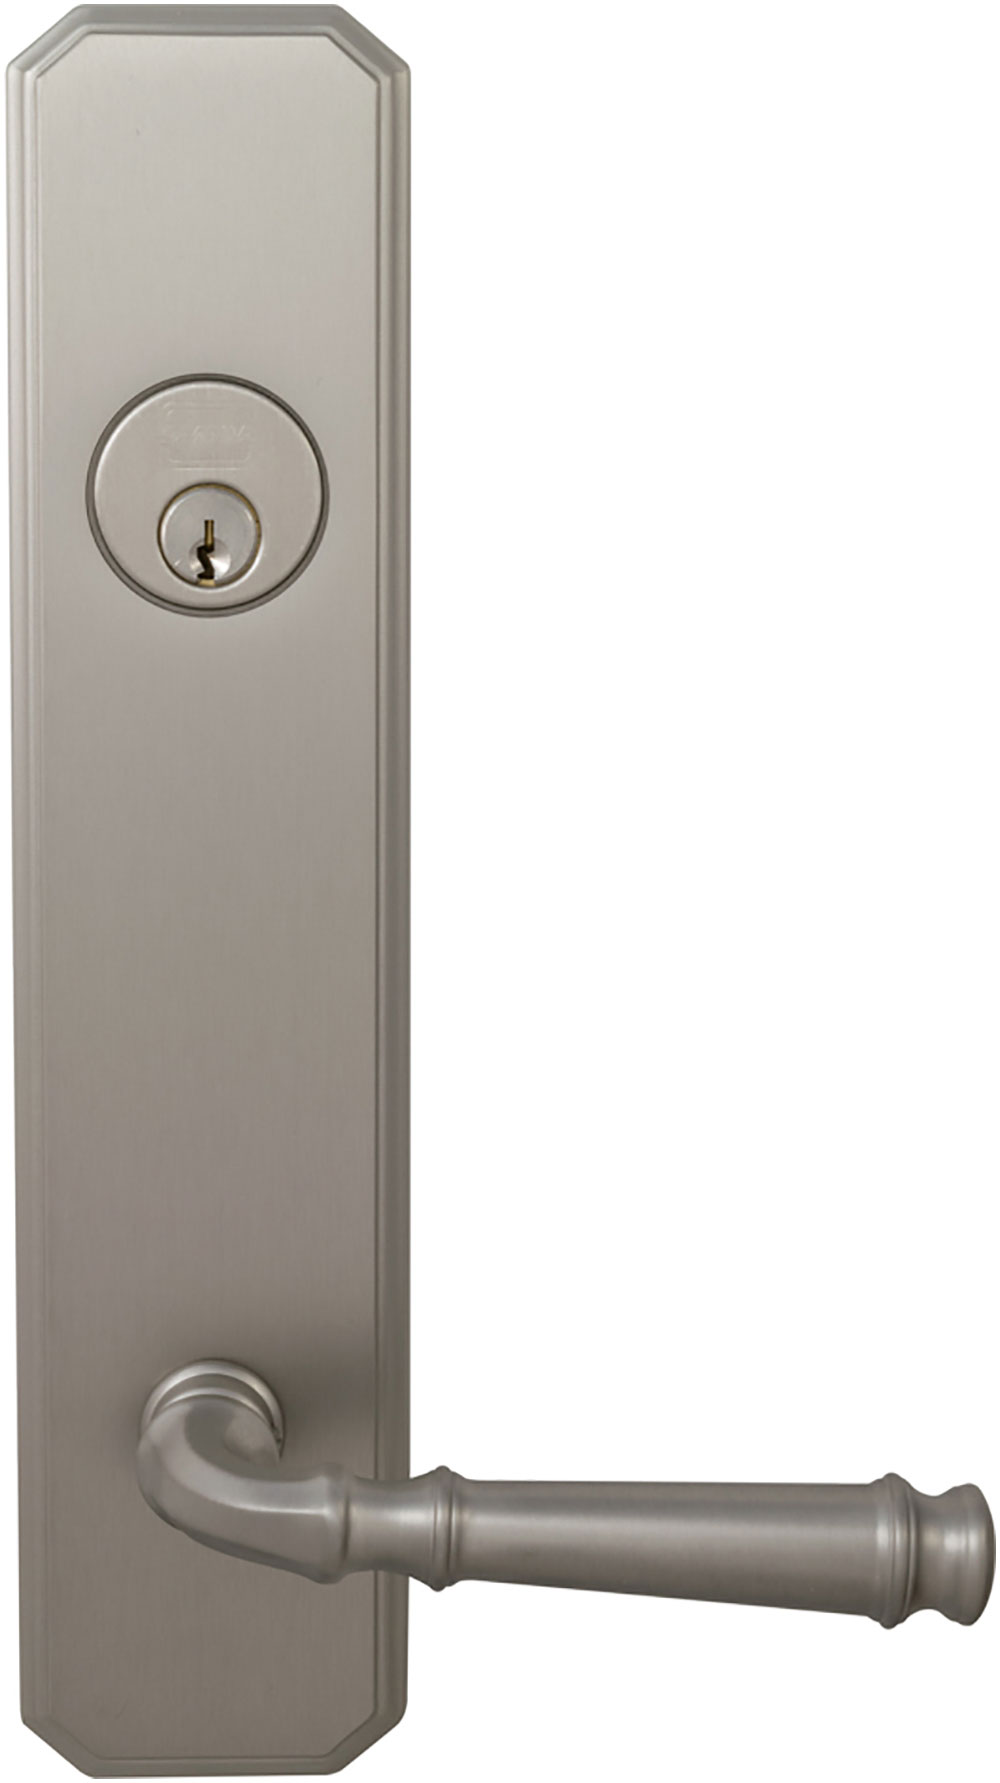 Item No.D11904 (US14 Polished Nickel Plated, Lacquered) (US15 Satin Nickel Plated, Lacquered)